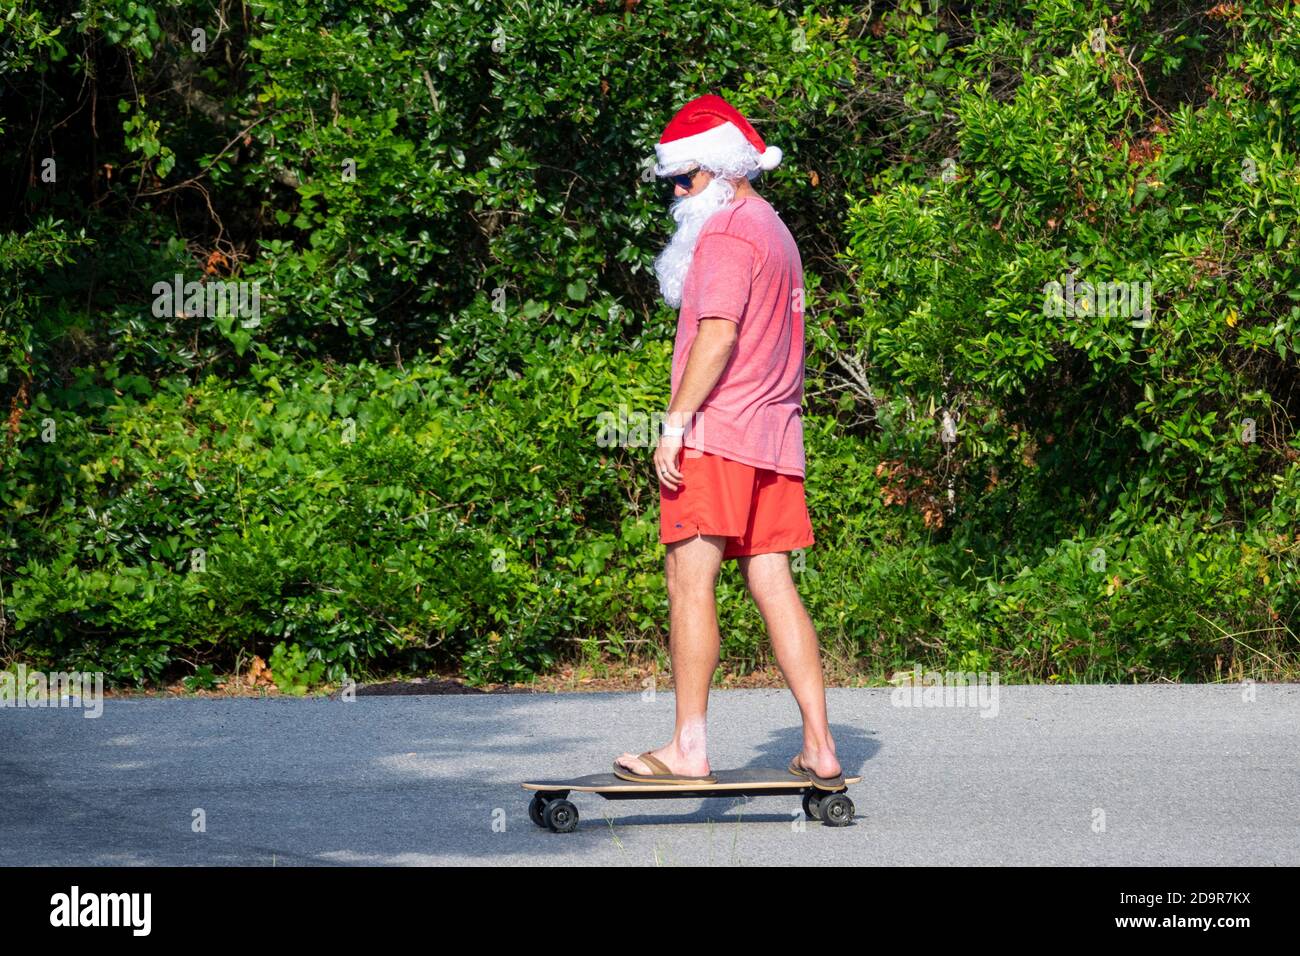 Dressed as beach Santa a man rides a skateboard in the annual Independence Day parade July 4, 2019 in Sullivan's Island, South Carolina. The tiny affluent Sea Island beach community across from Charleston holds an outsized golf cart parade featuring more than 75 decorated carts. Stock Photo